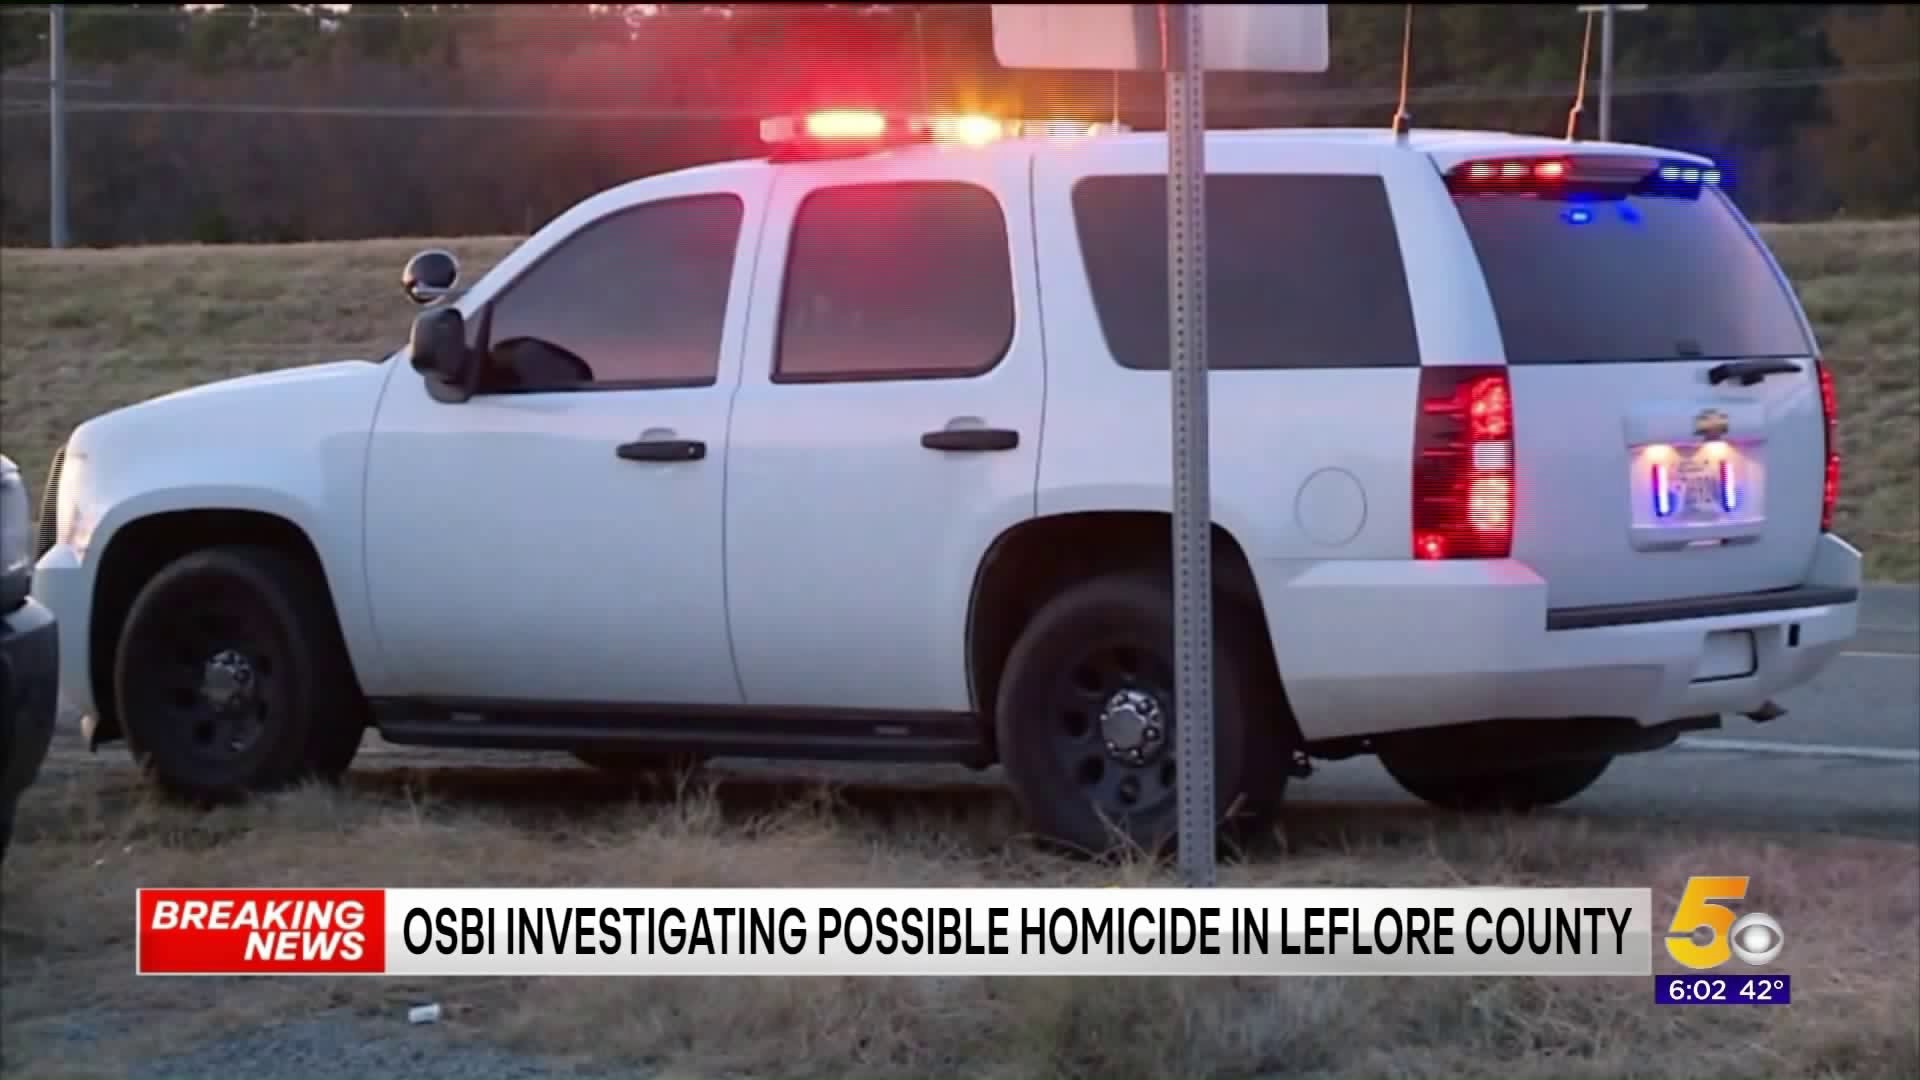 OSBI Investigating Possible Homicide After Body Found In LeFlore County